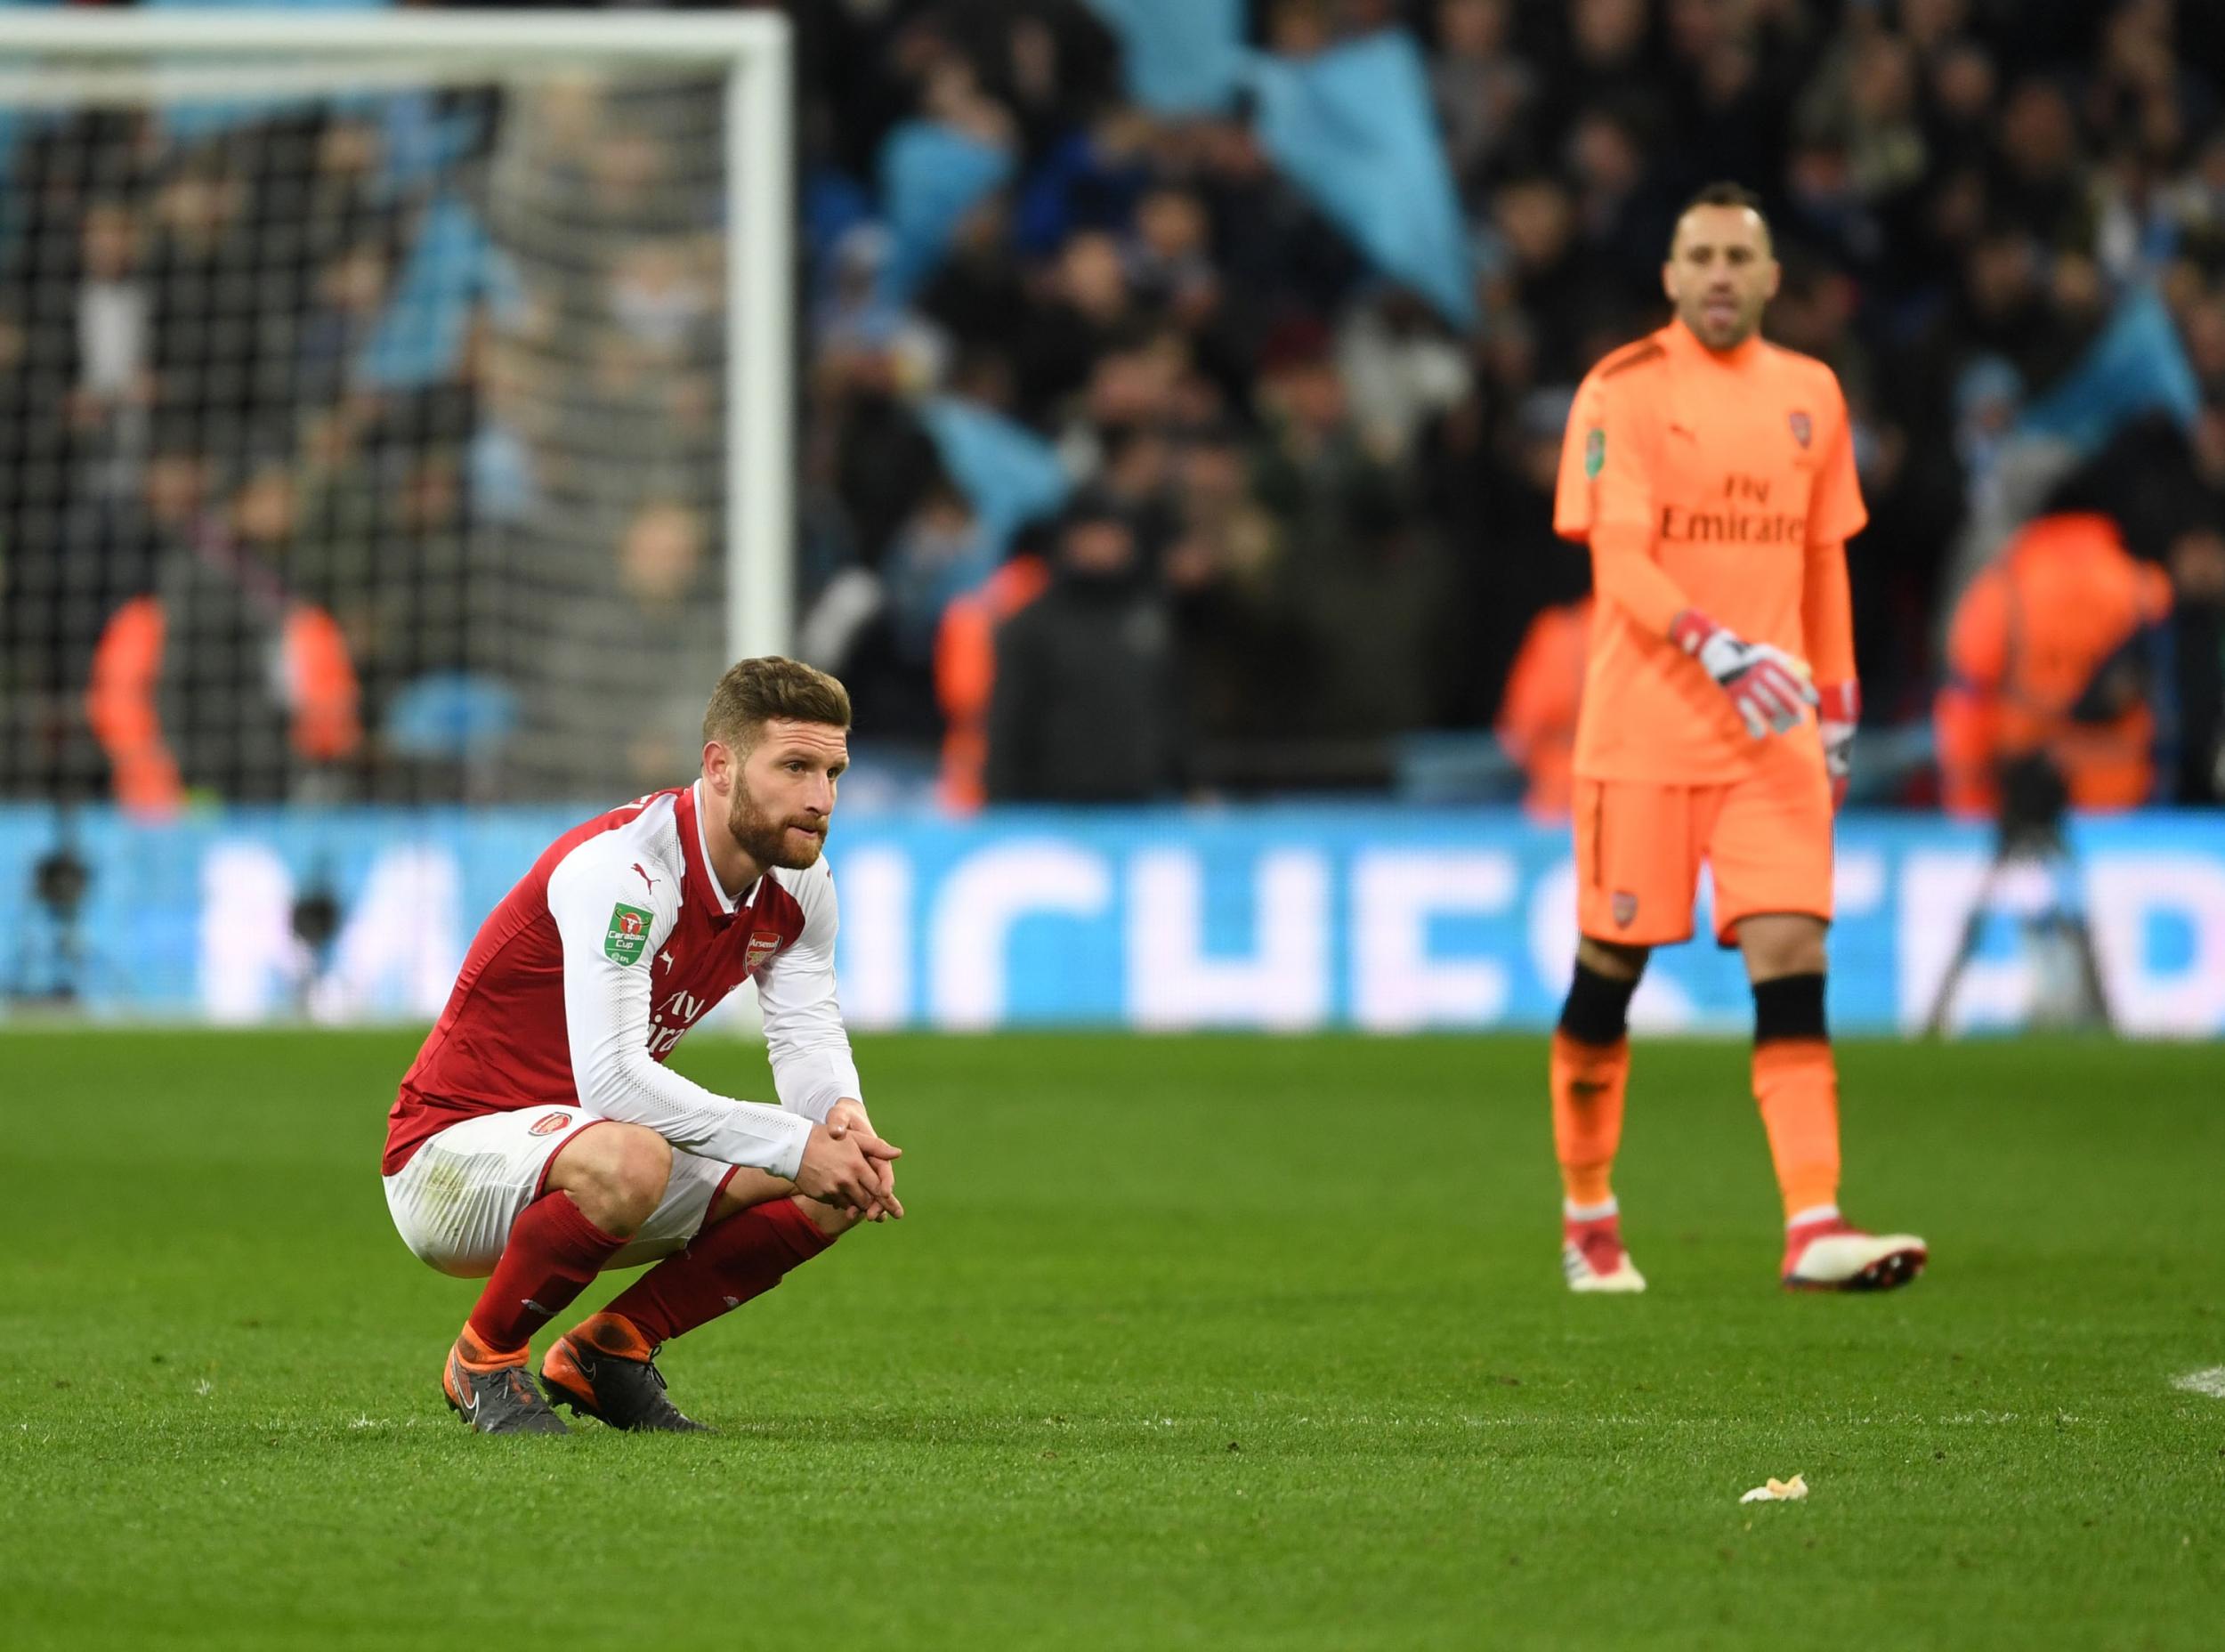 Mustafi was lambasted for his part in City's opener